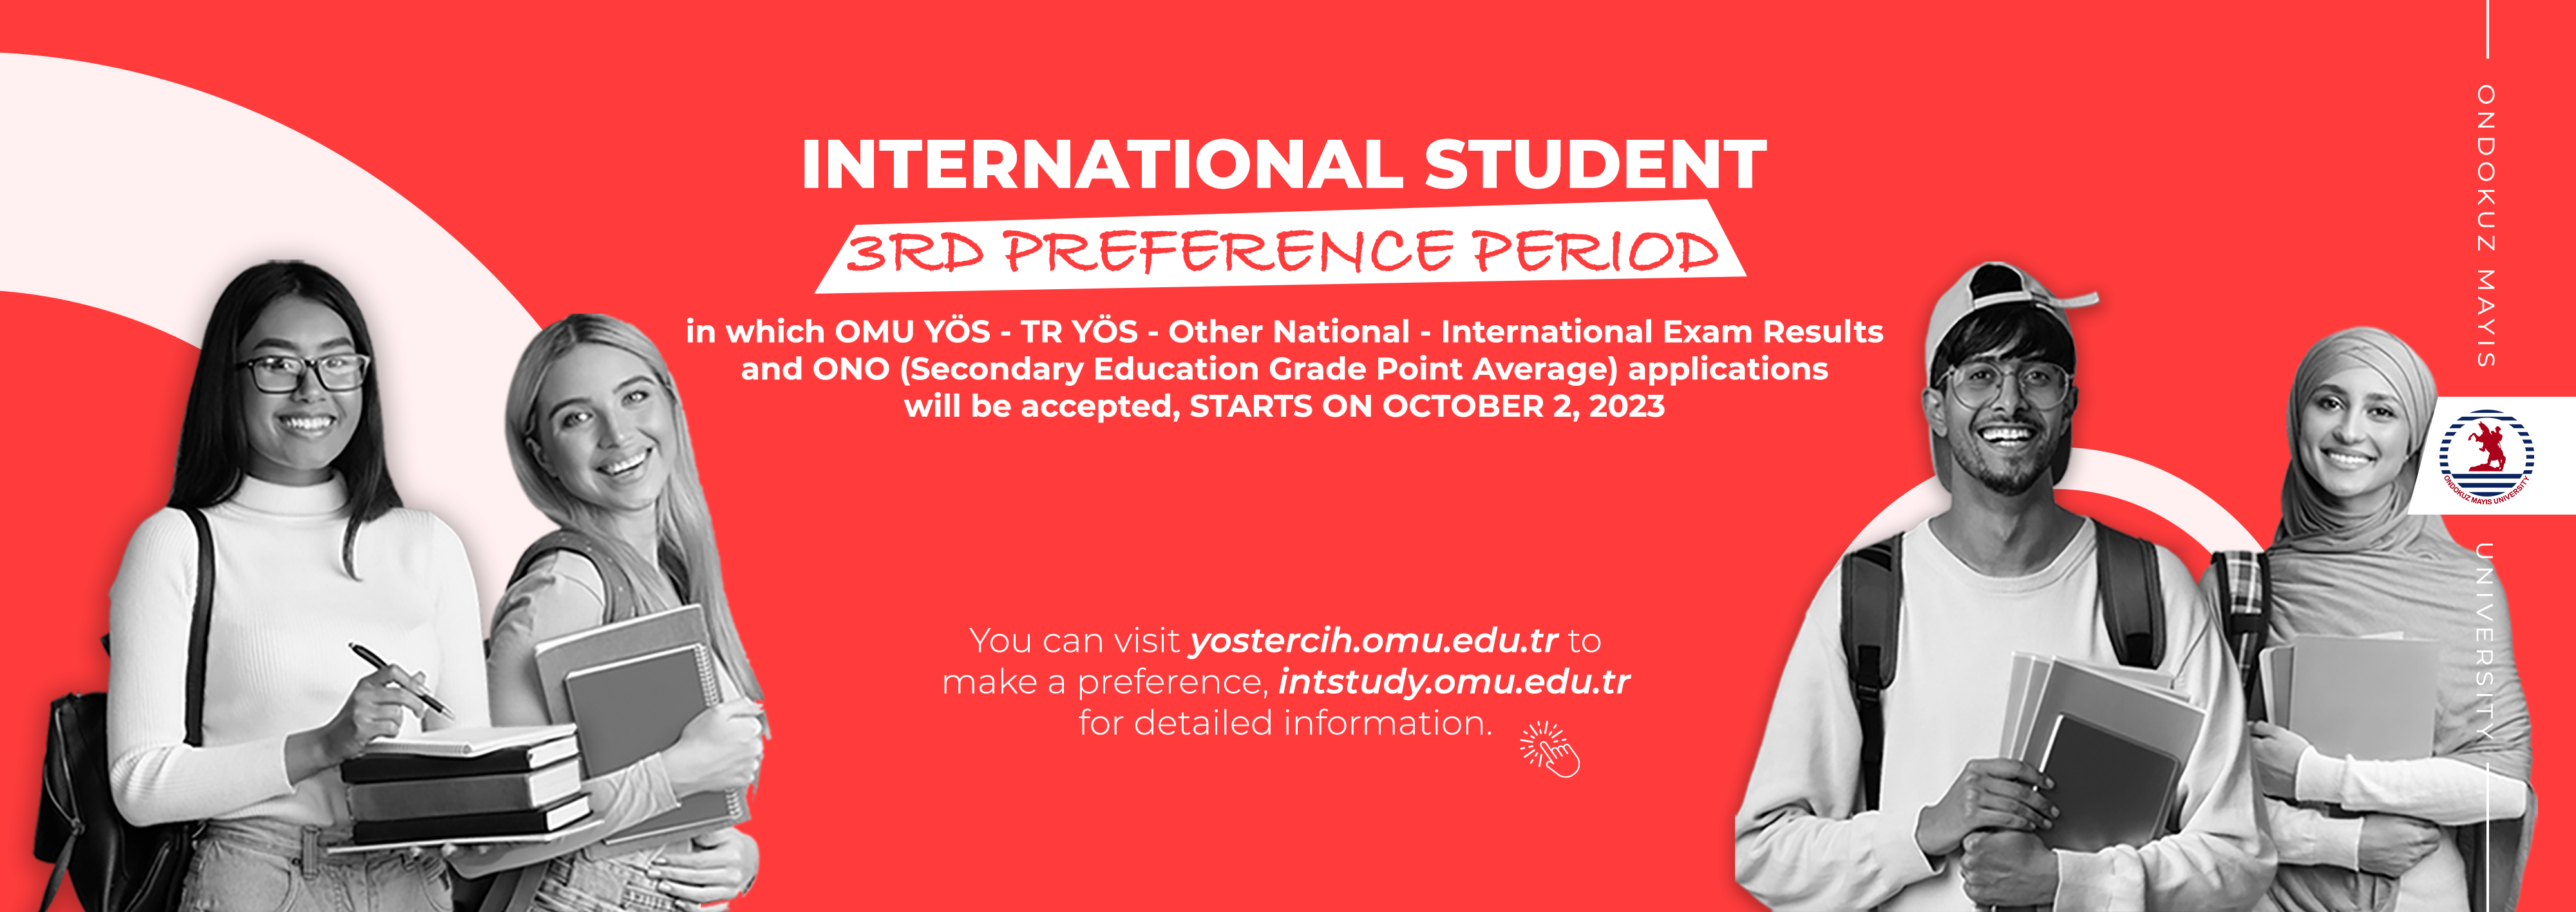 International Student 3rd Preference Period has Started